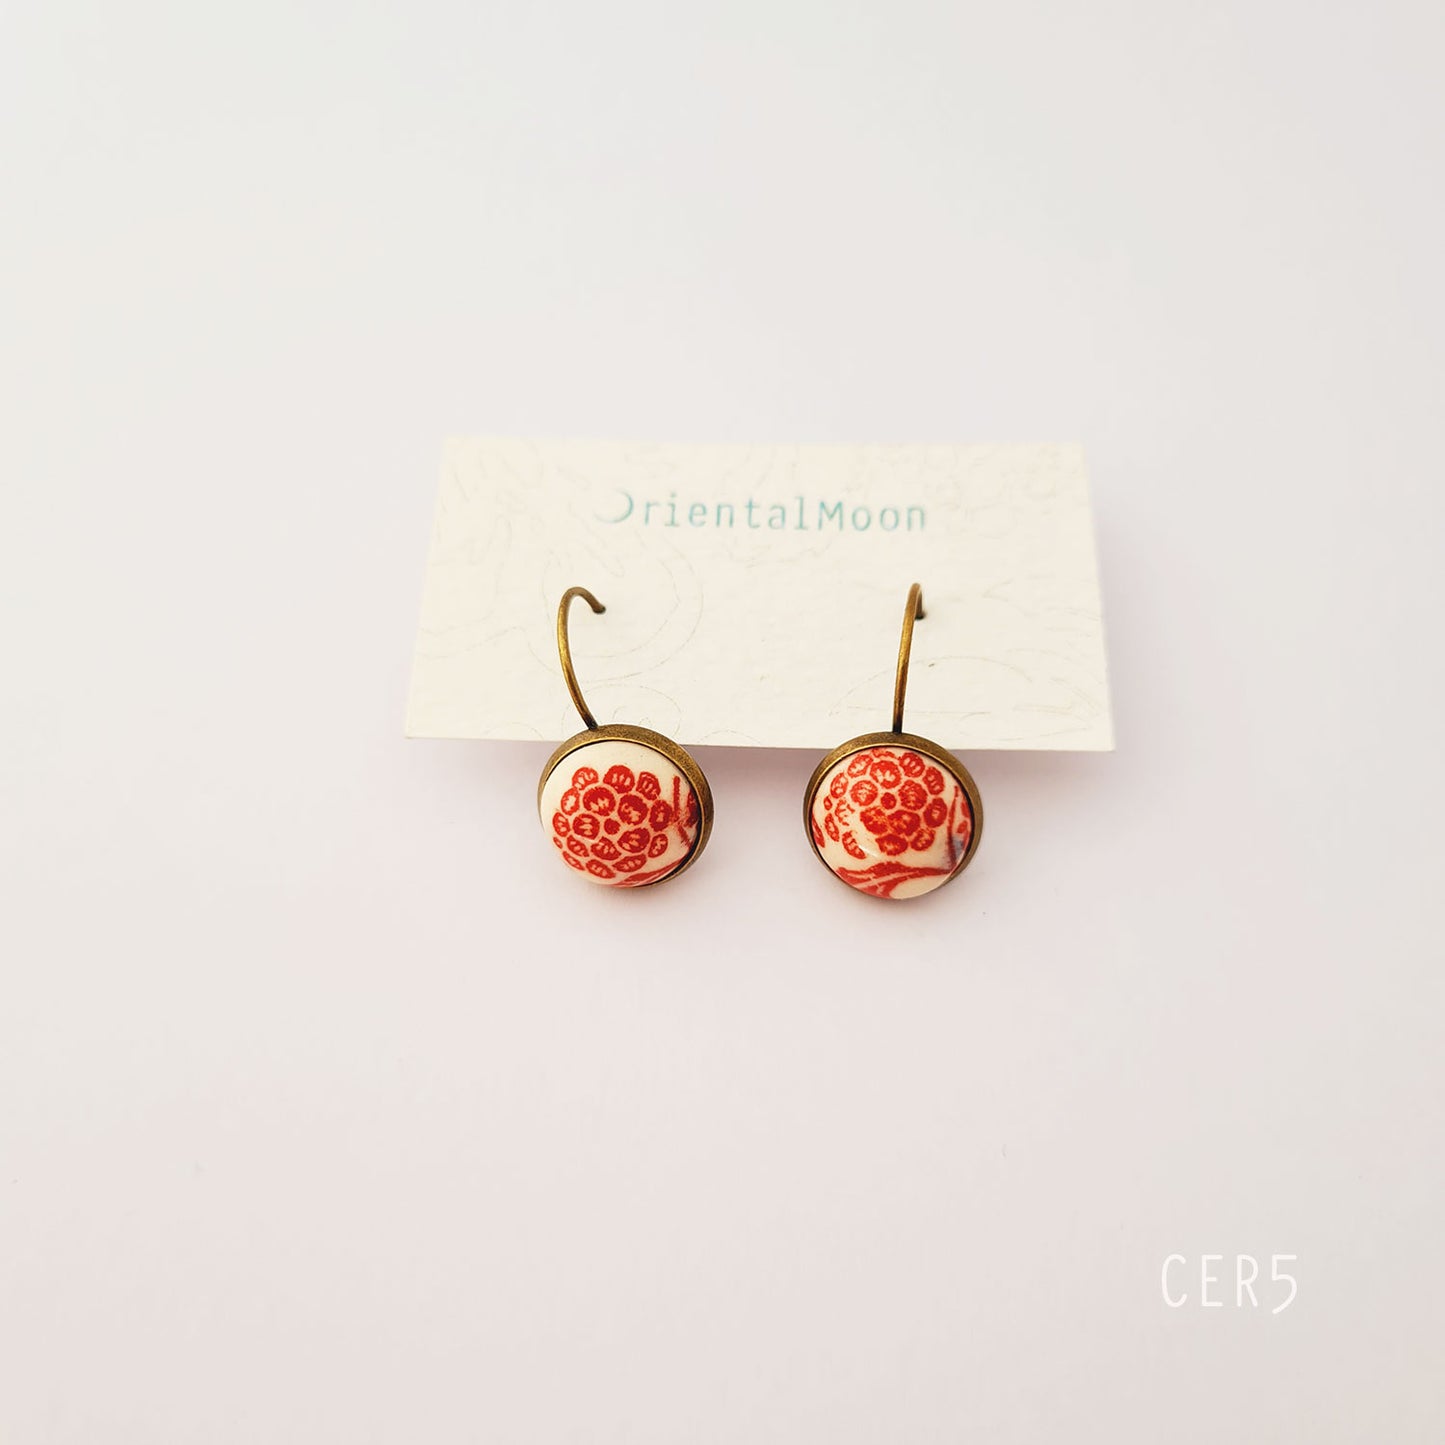 Cabonchon lever back earrings with brass base (red)ต่างหูหลังเต่าแบบเกี่ยว( Pattern type)